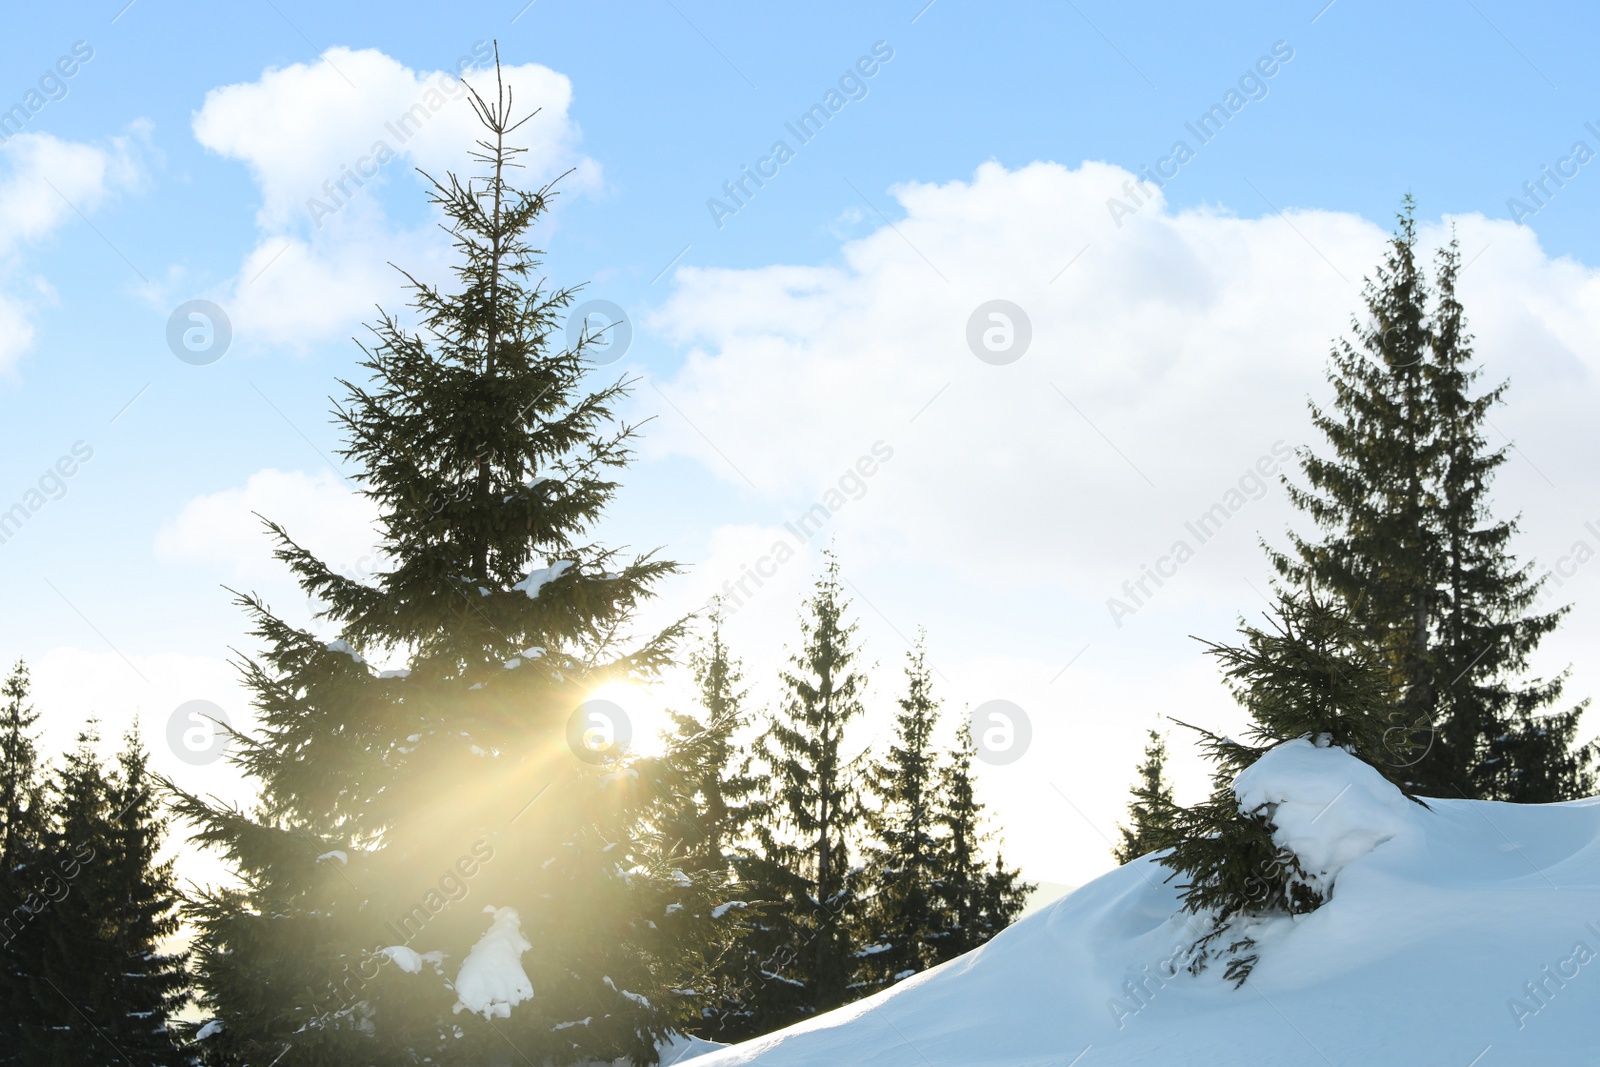 Photo of Picturesque view of snowy forest in winter